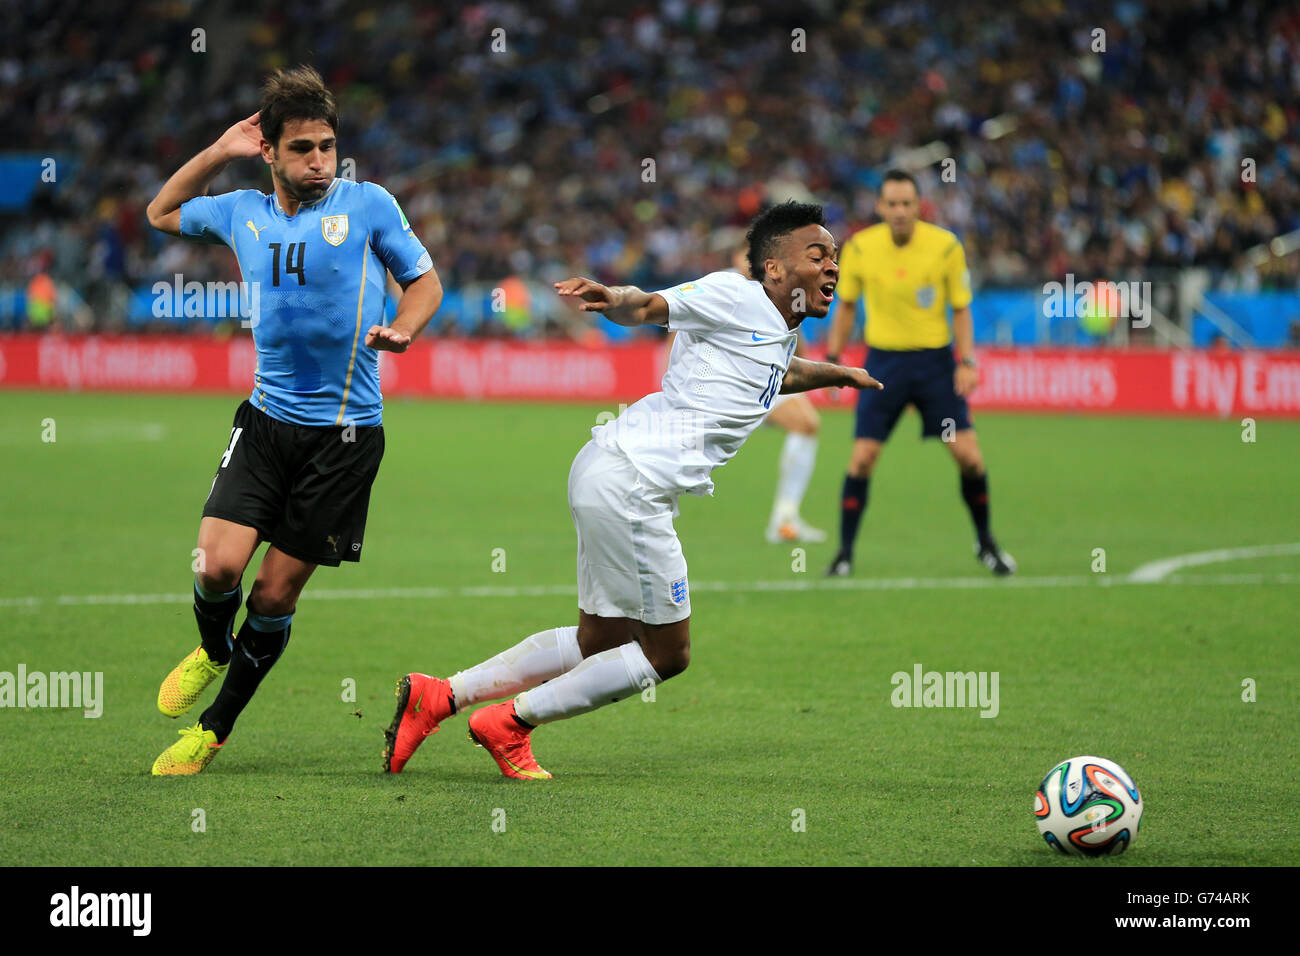 Soccer - FIFA World Cup 2014 - Group D - Uruguay v England - Estadio Do Sao Paulo. England's Raheem Sterling (right) goes down in the box under a challenge from Uruguay's Nicolas Lodeiro Stock Photo